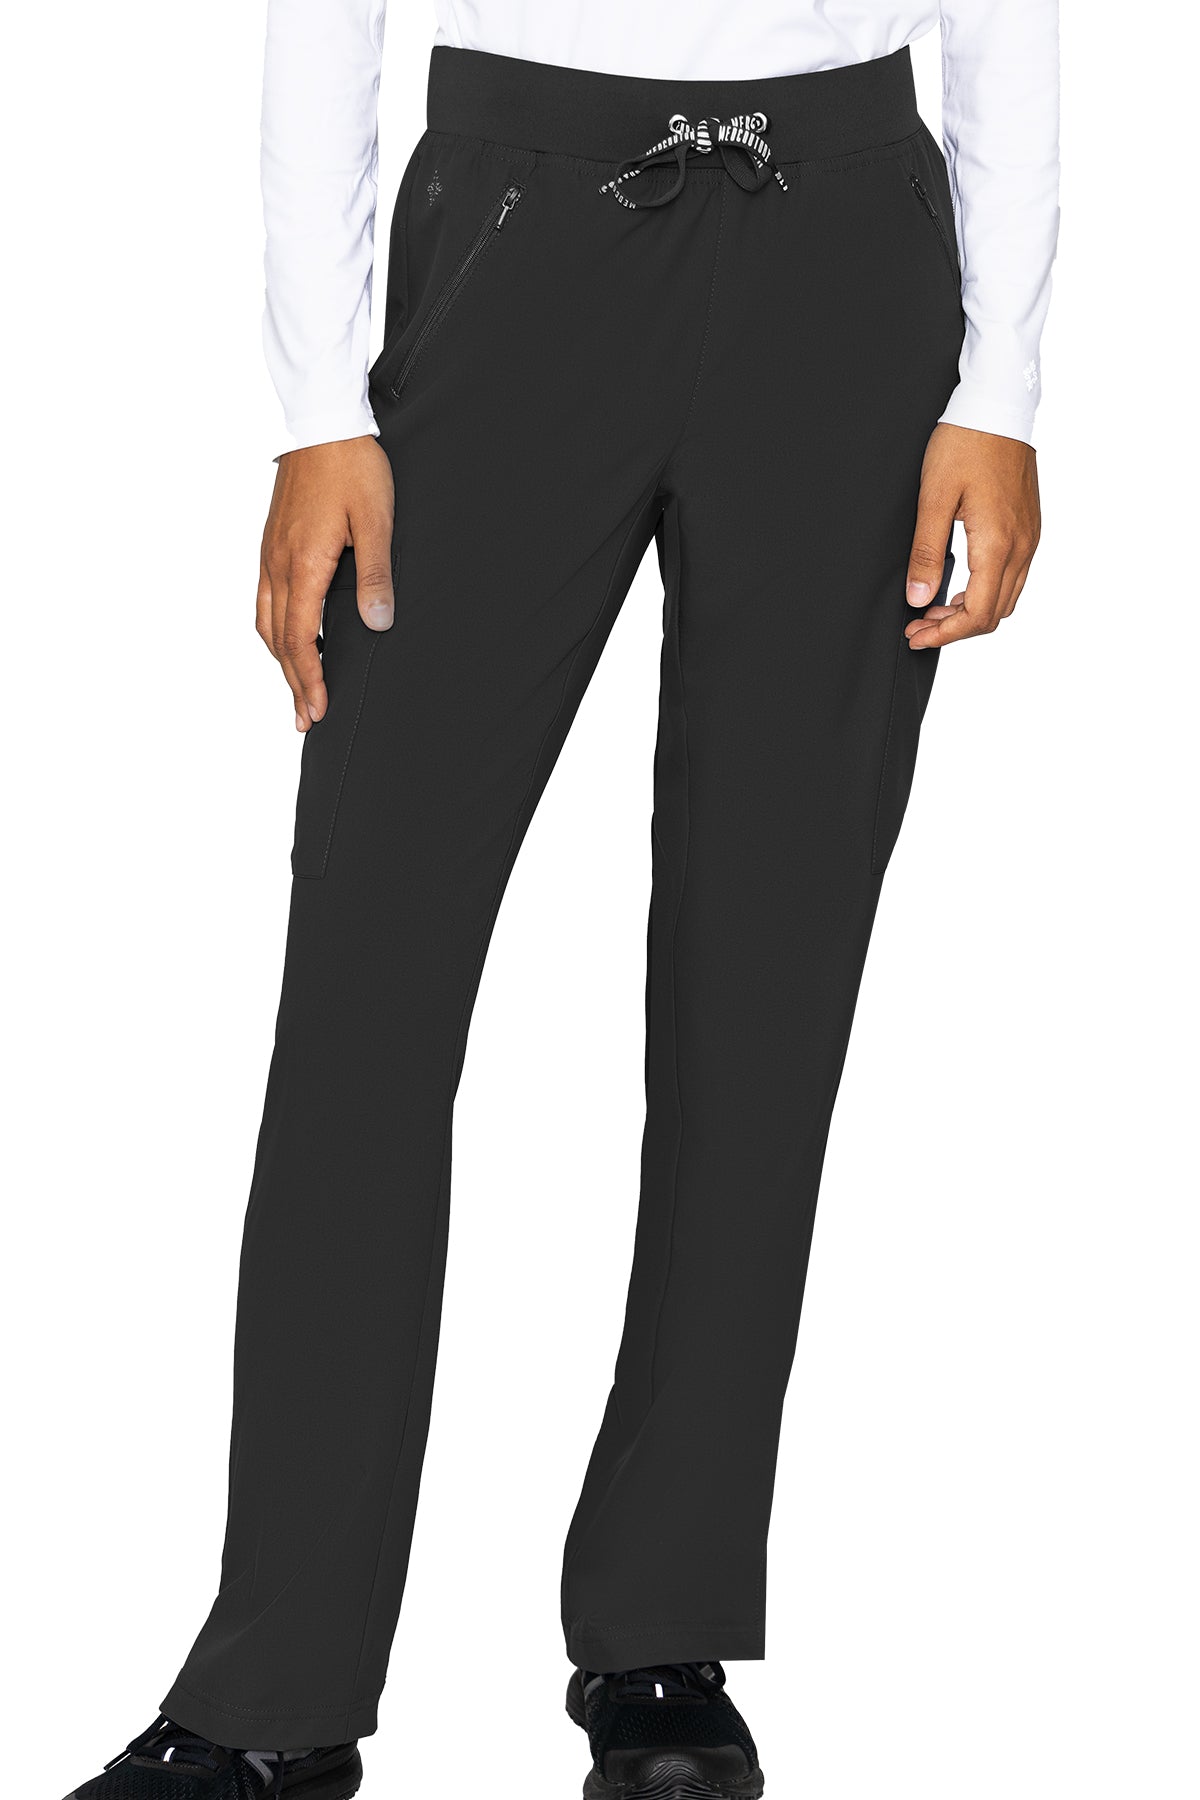 Med Couture Scrub Pants Insight Zipper Pocket Pant in Black at Parker's Clothing and Shoes